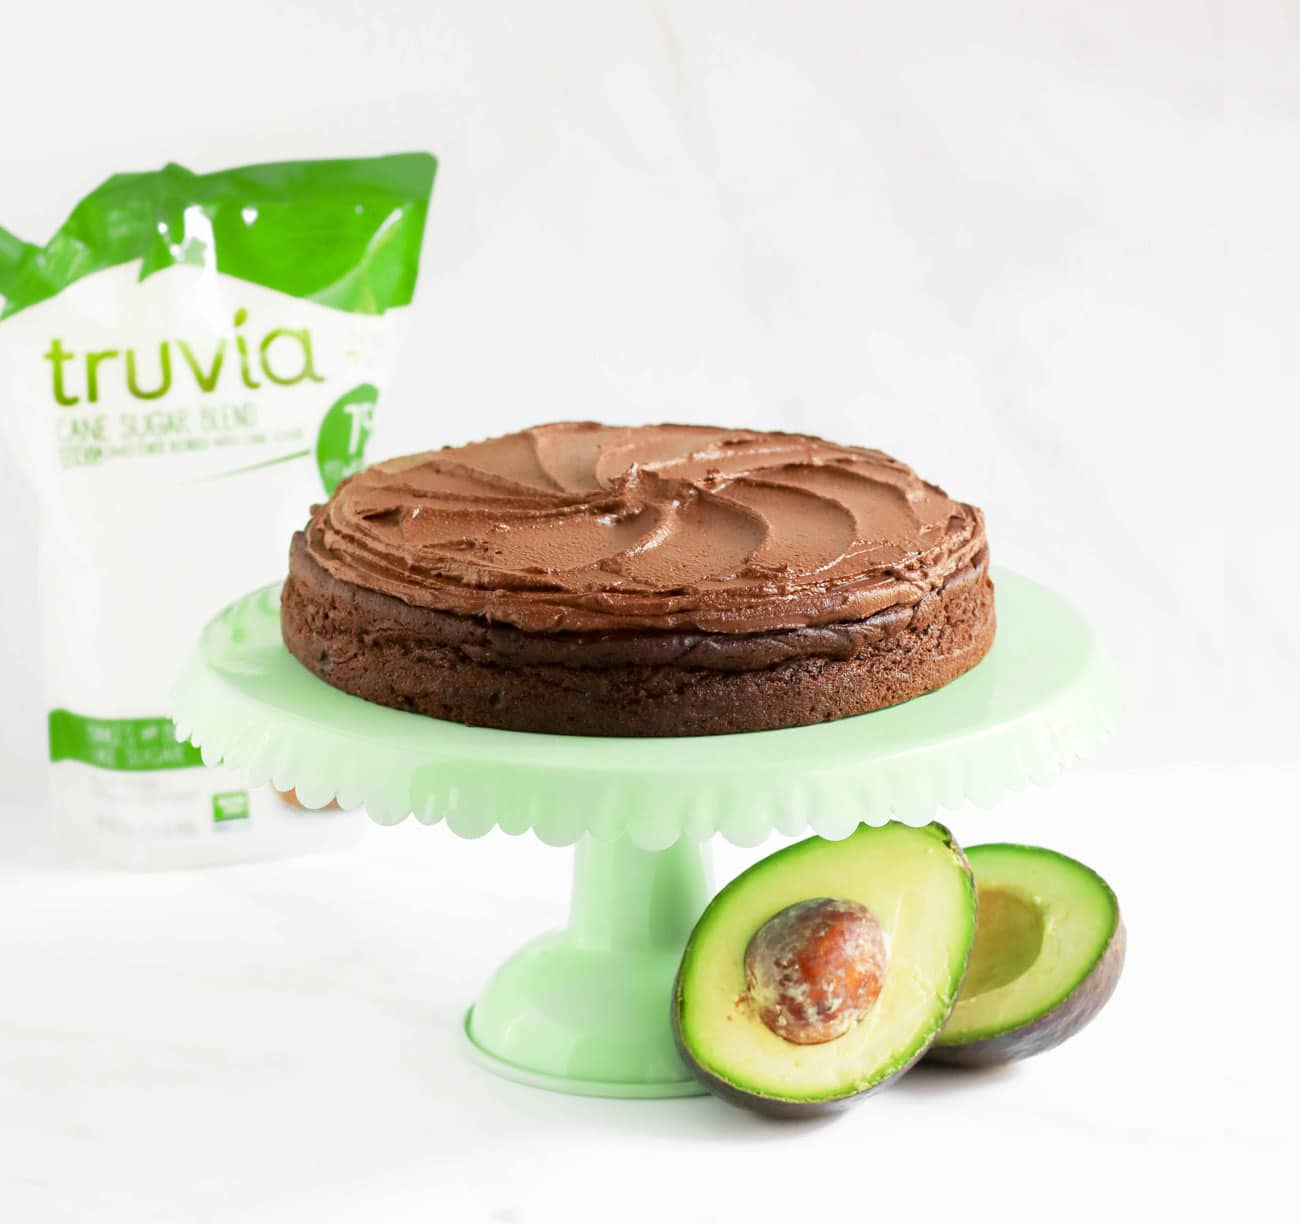 This healthier Chocolate Avocado Cake is super chocolatey, perfectly sweet, and nutritionally balanced with healthy fats, whole grains, lots of fiber, and a hit of protein! It's just as rich, and chocolatey as classic chocolate cake, except this is made without the butter, oil, regular white sugar, and bleached flour!